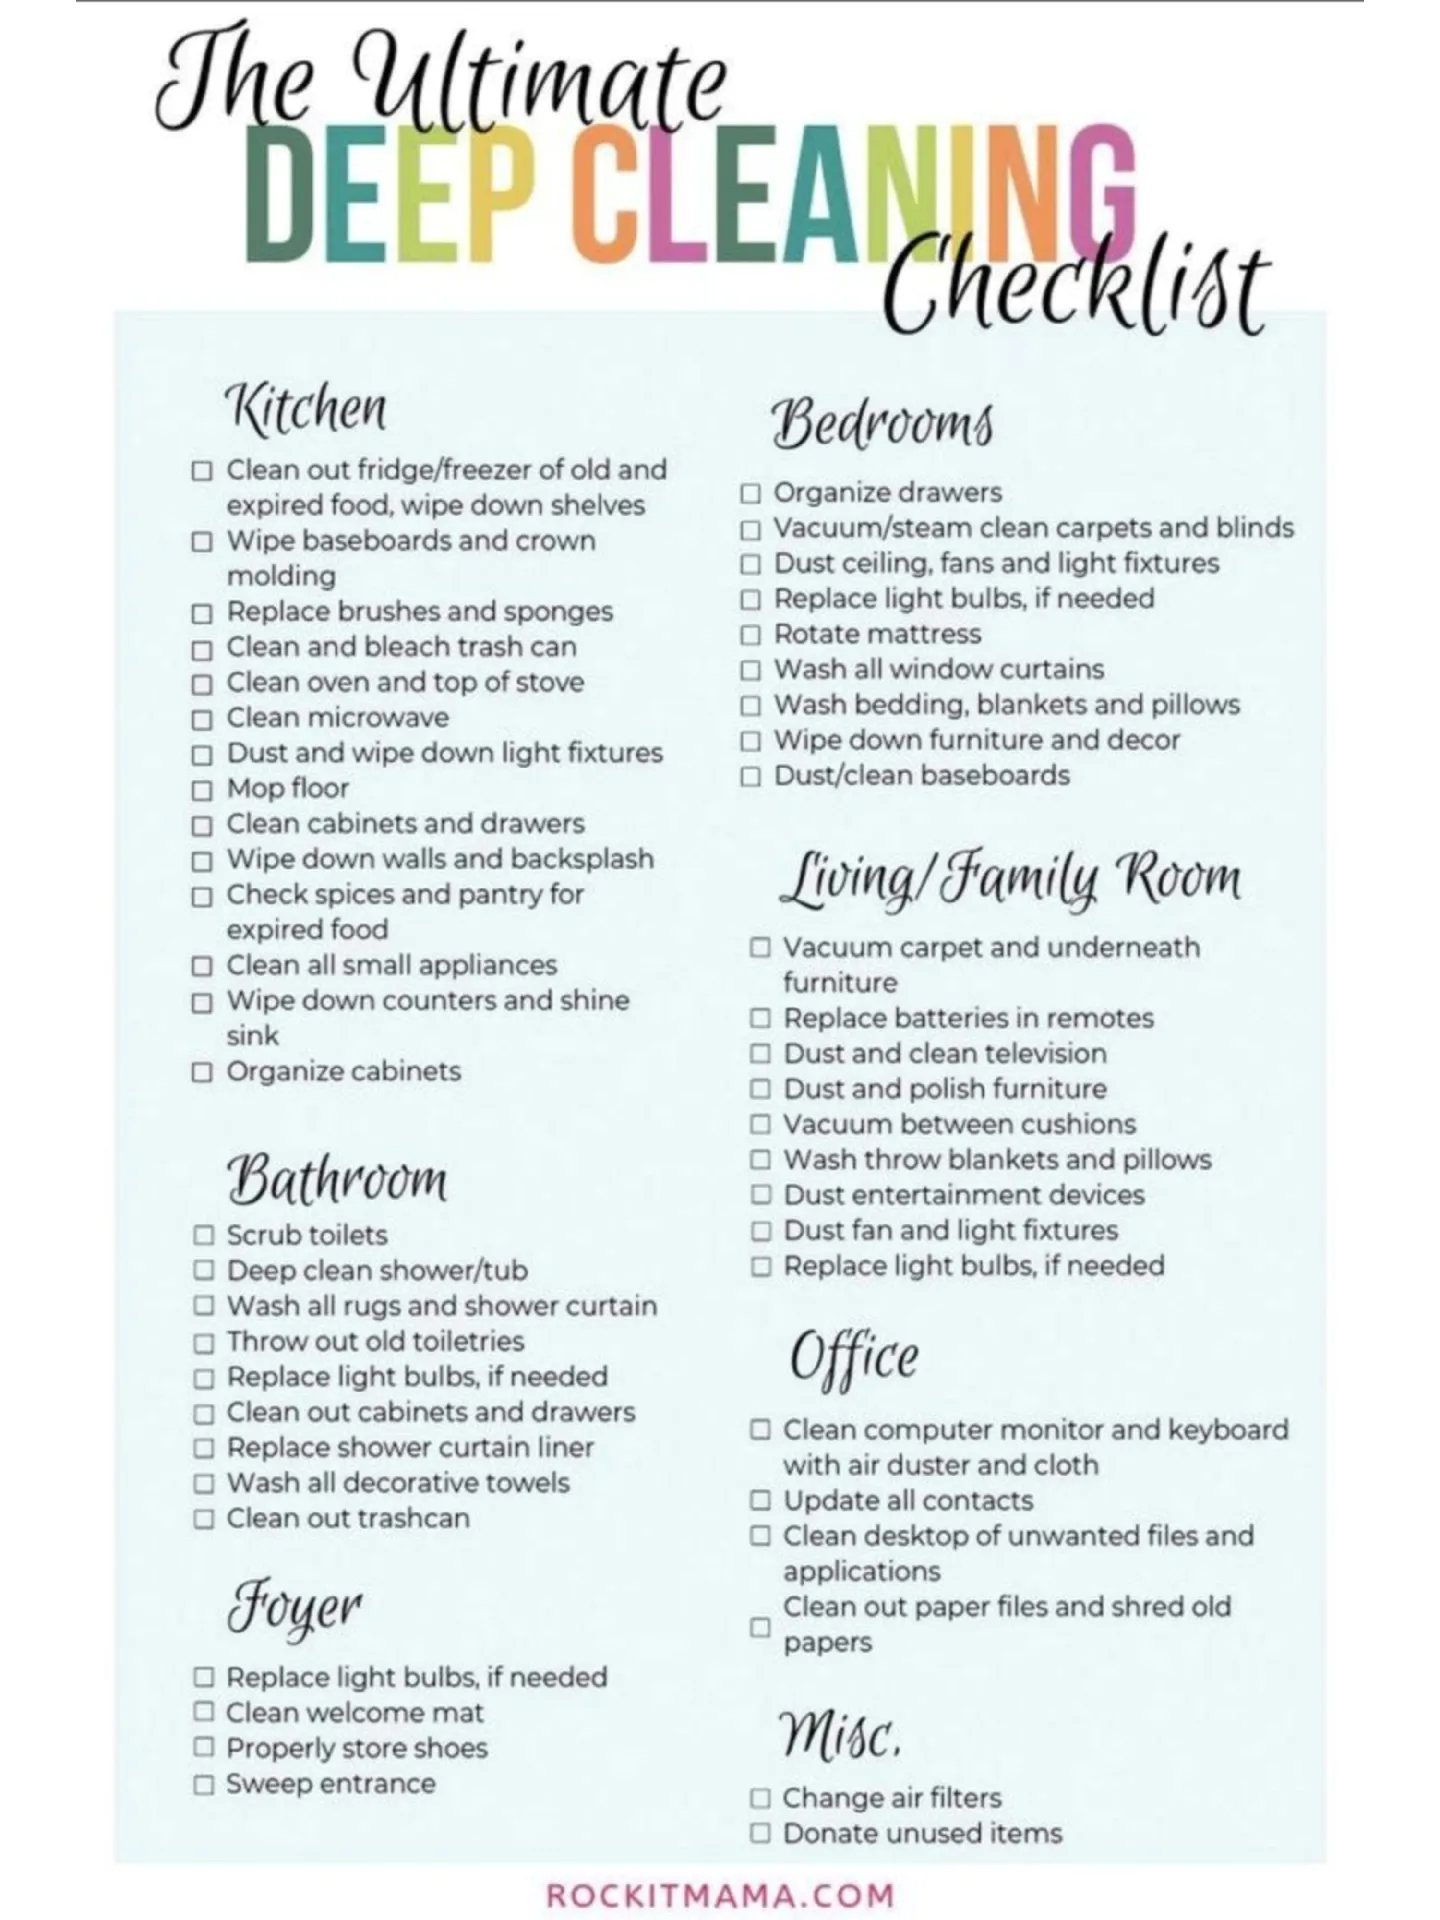 Cleaning Schedule: The Ultimate House Cleaning Checklist